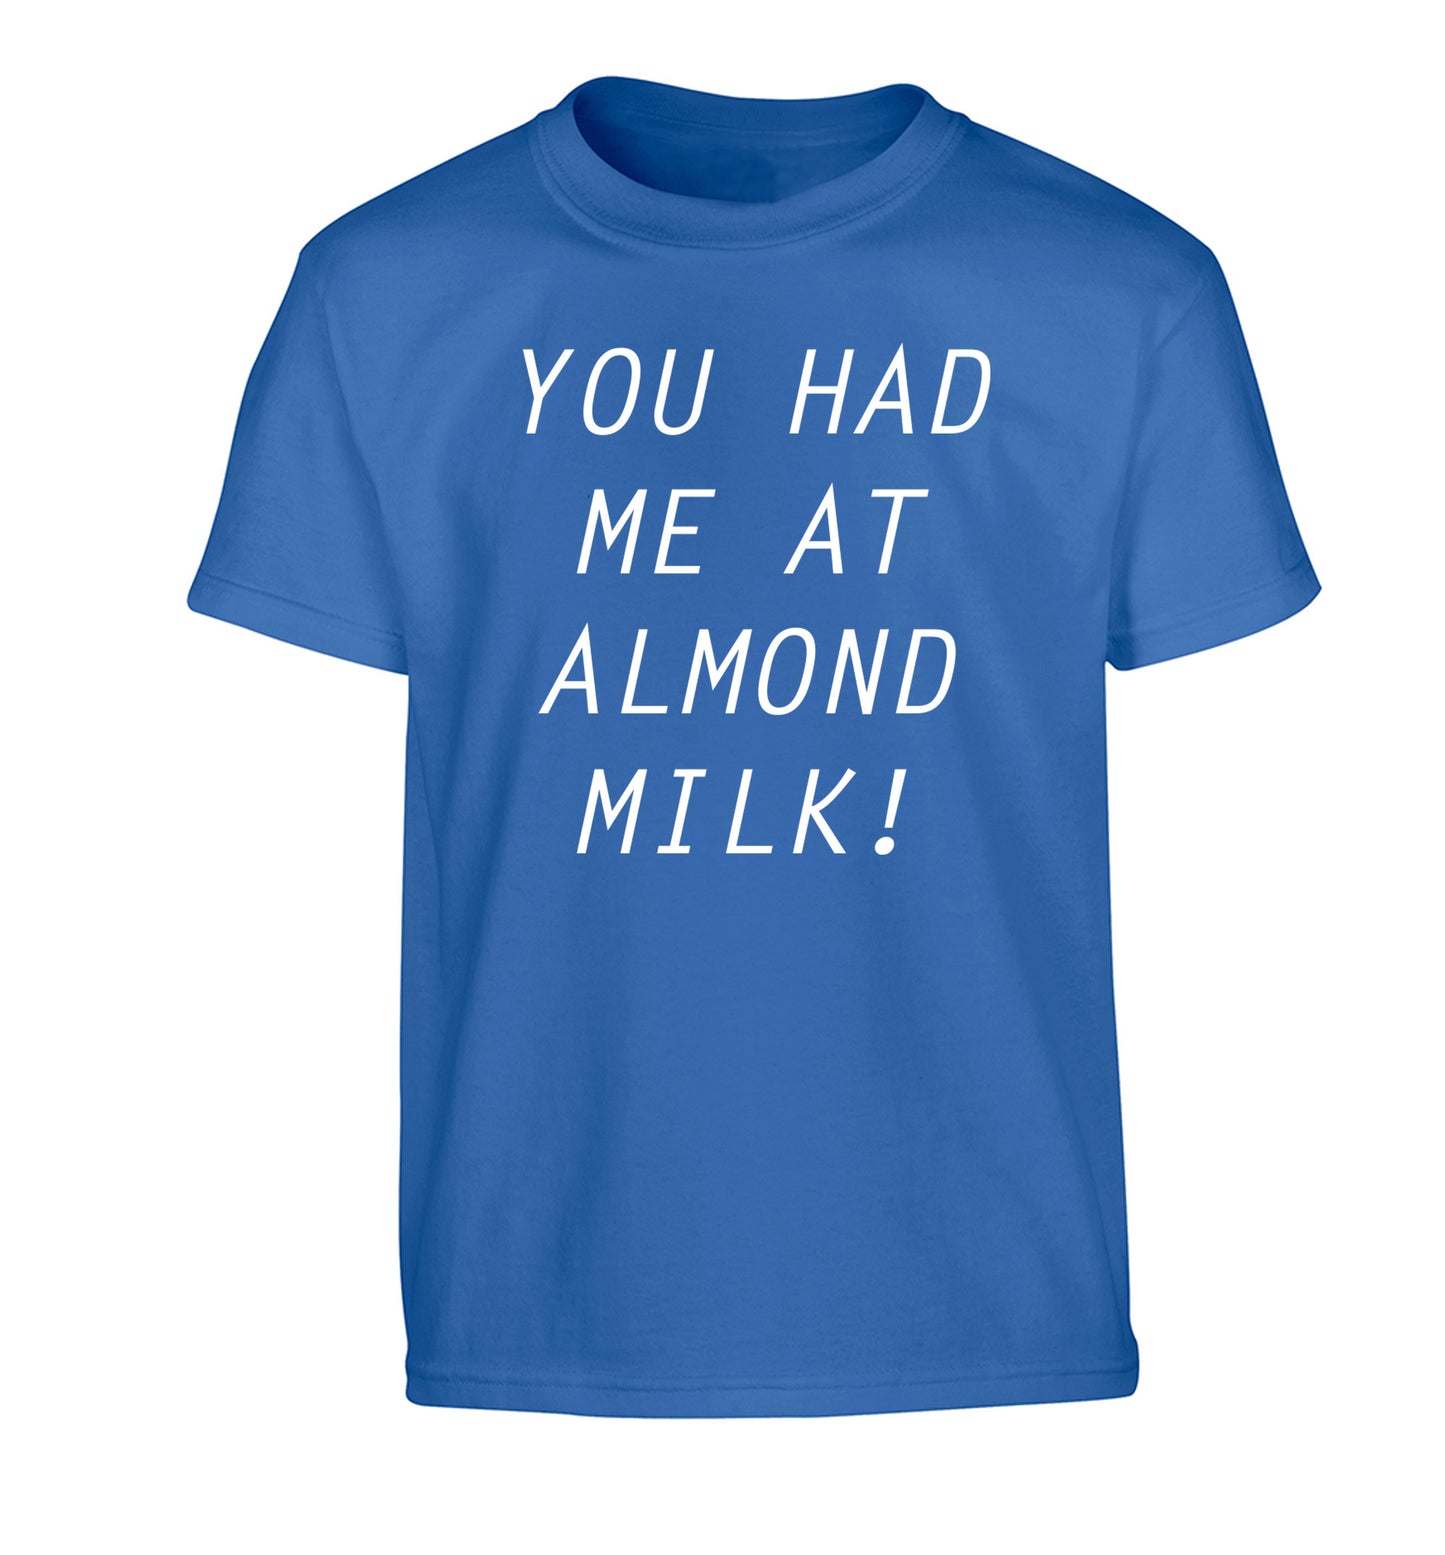 You had me at almond milk Children's blue Tshirt 12-14 Years